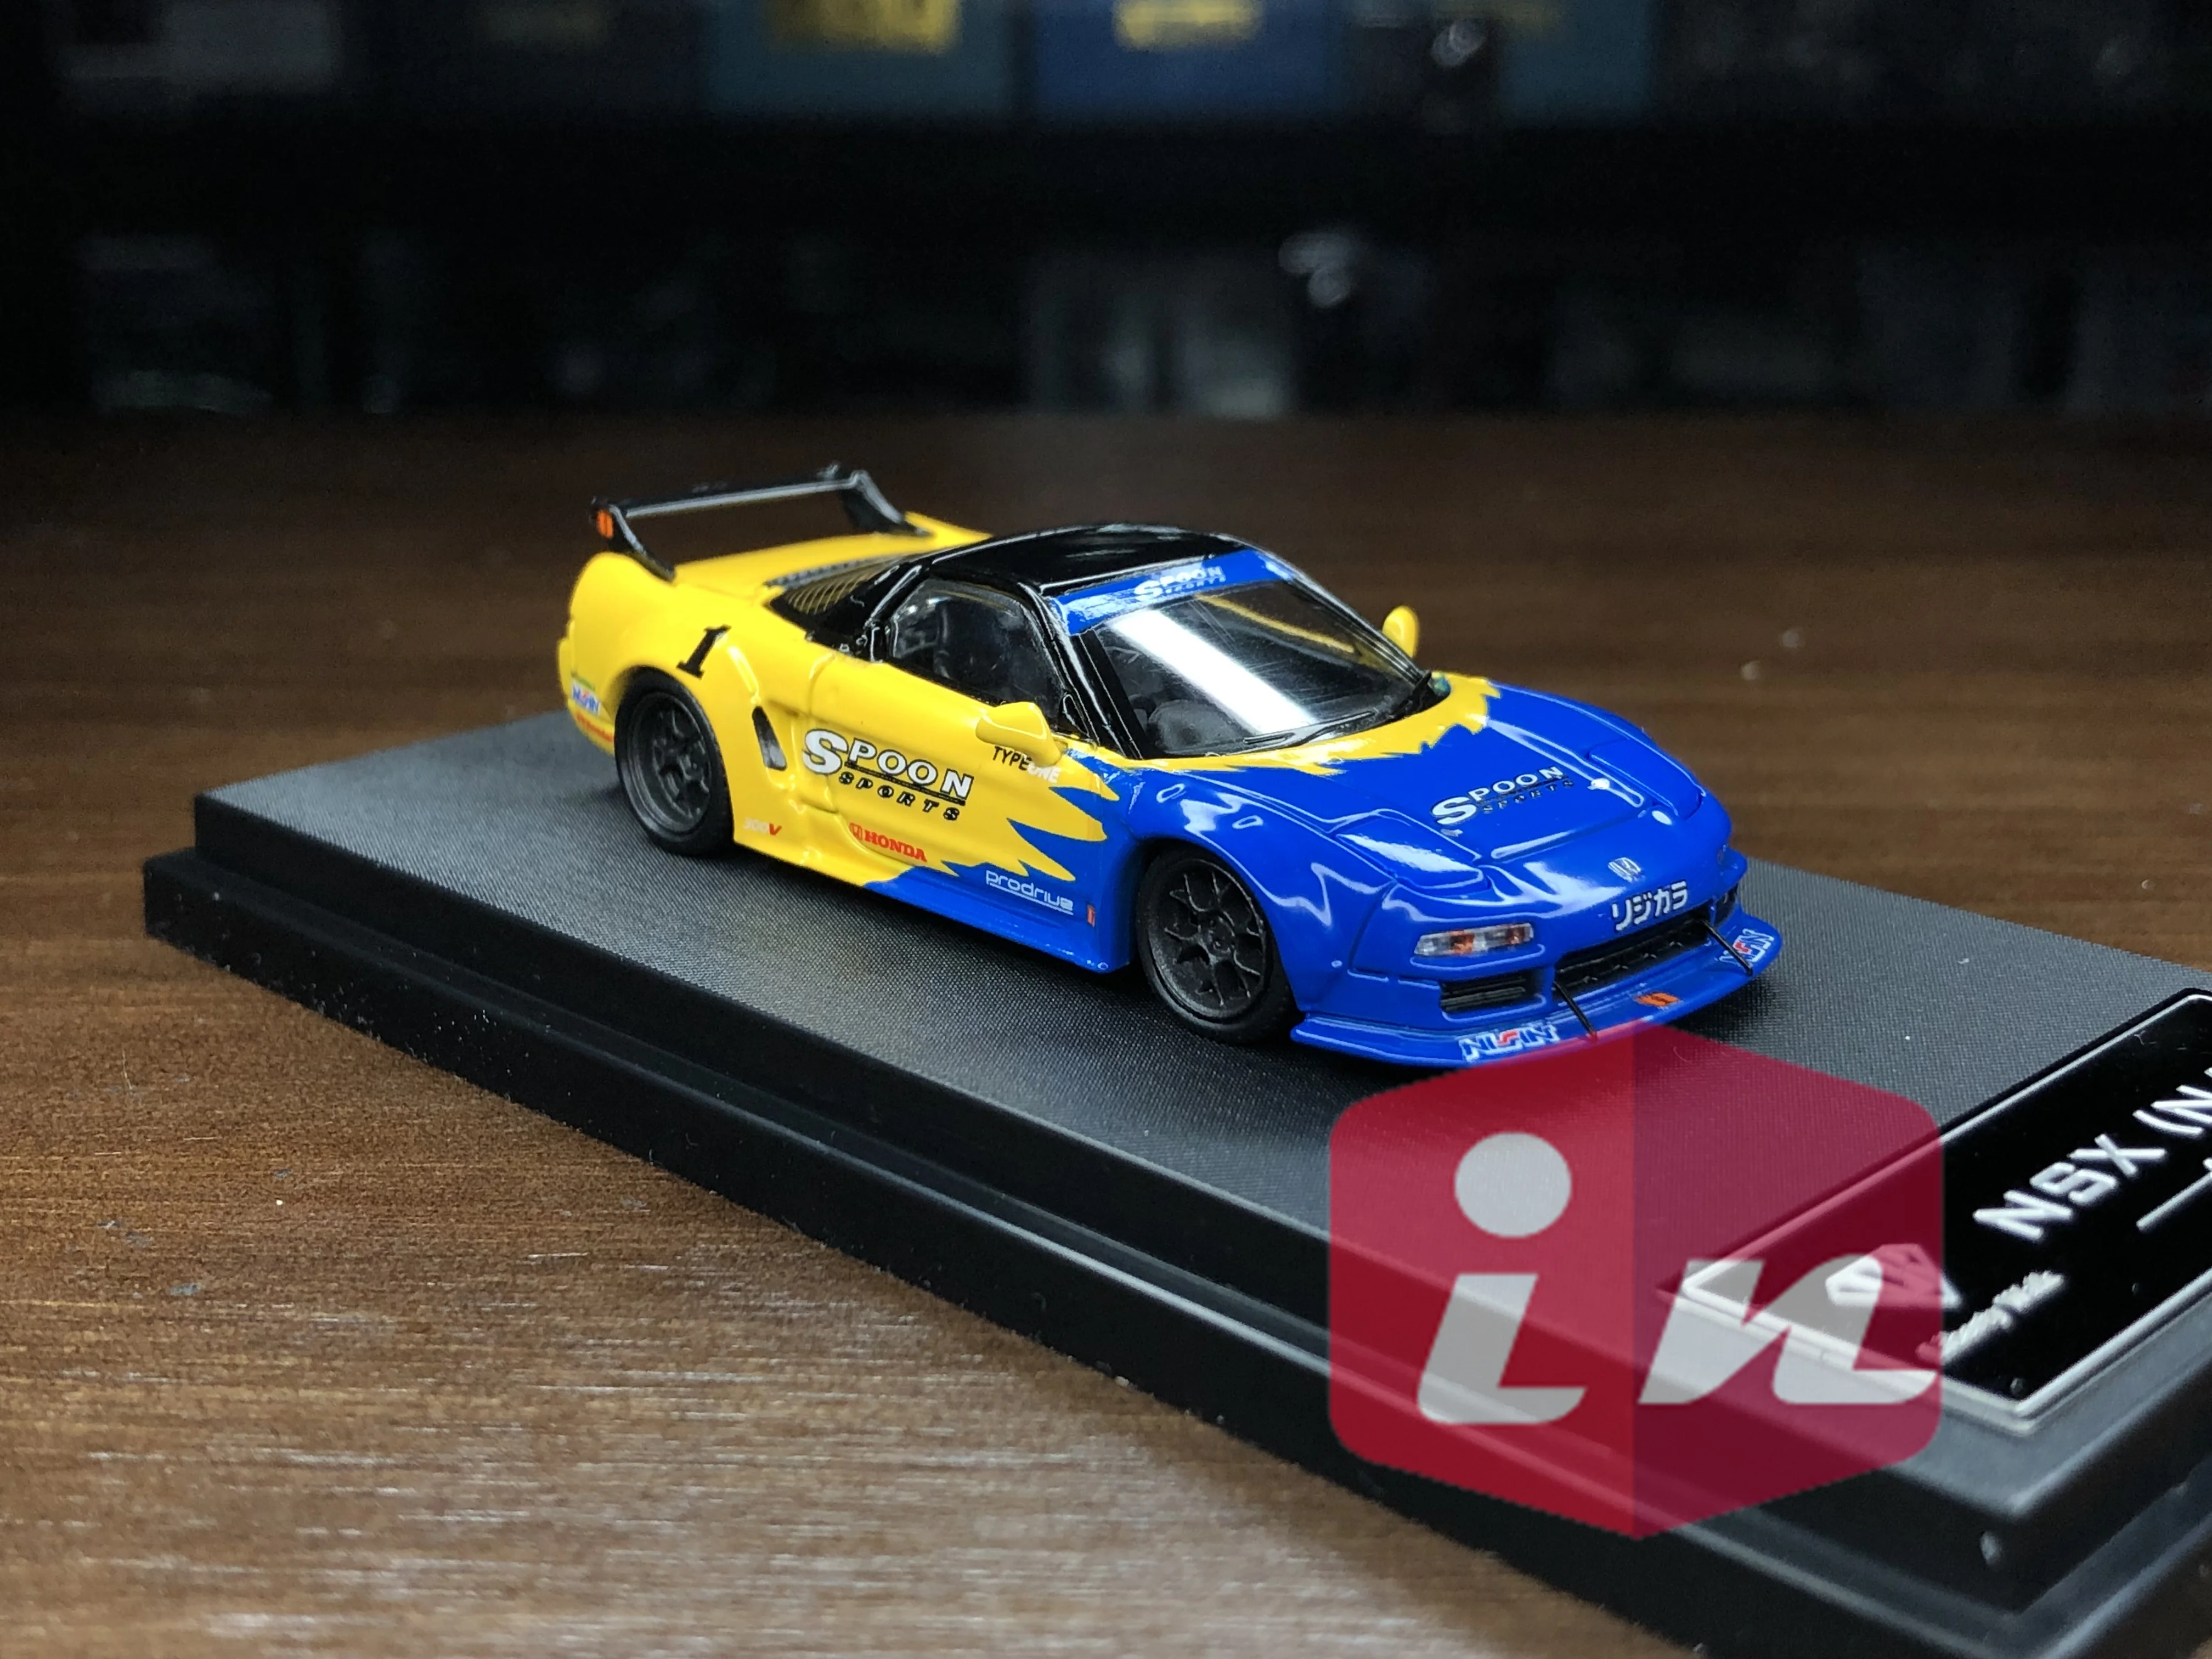 

Star Model 1/64 LBWK NSX NA1 Spoon JDM Diecast Model Car Collection Limited Edition Hobby Toys